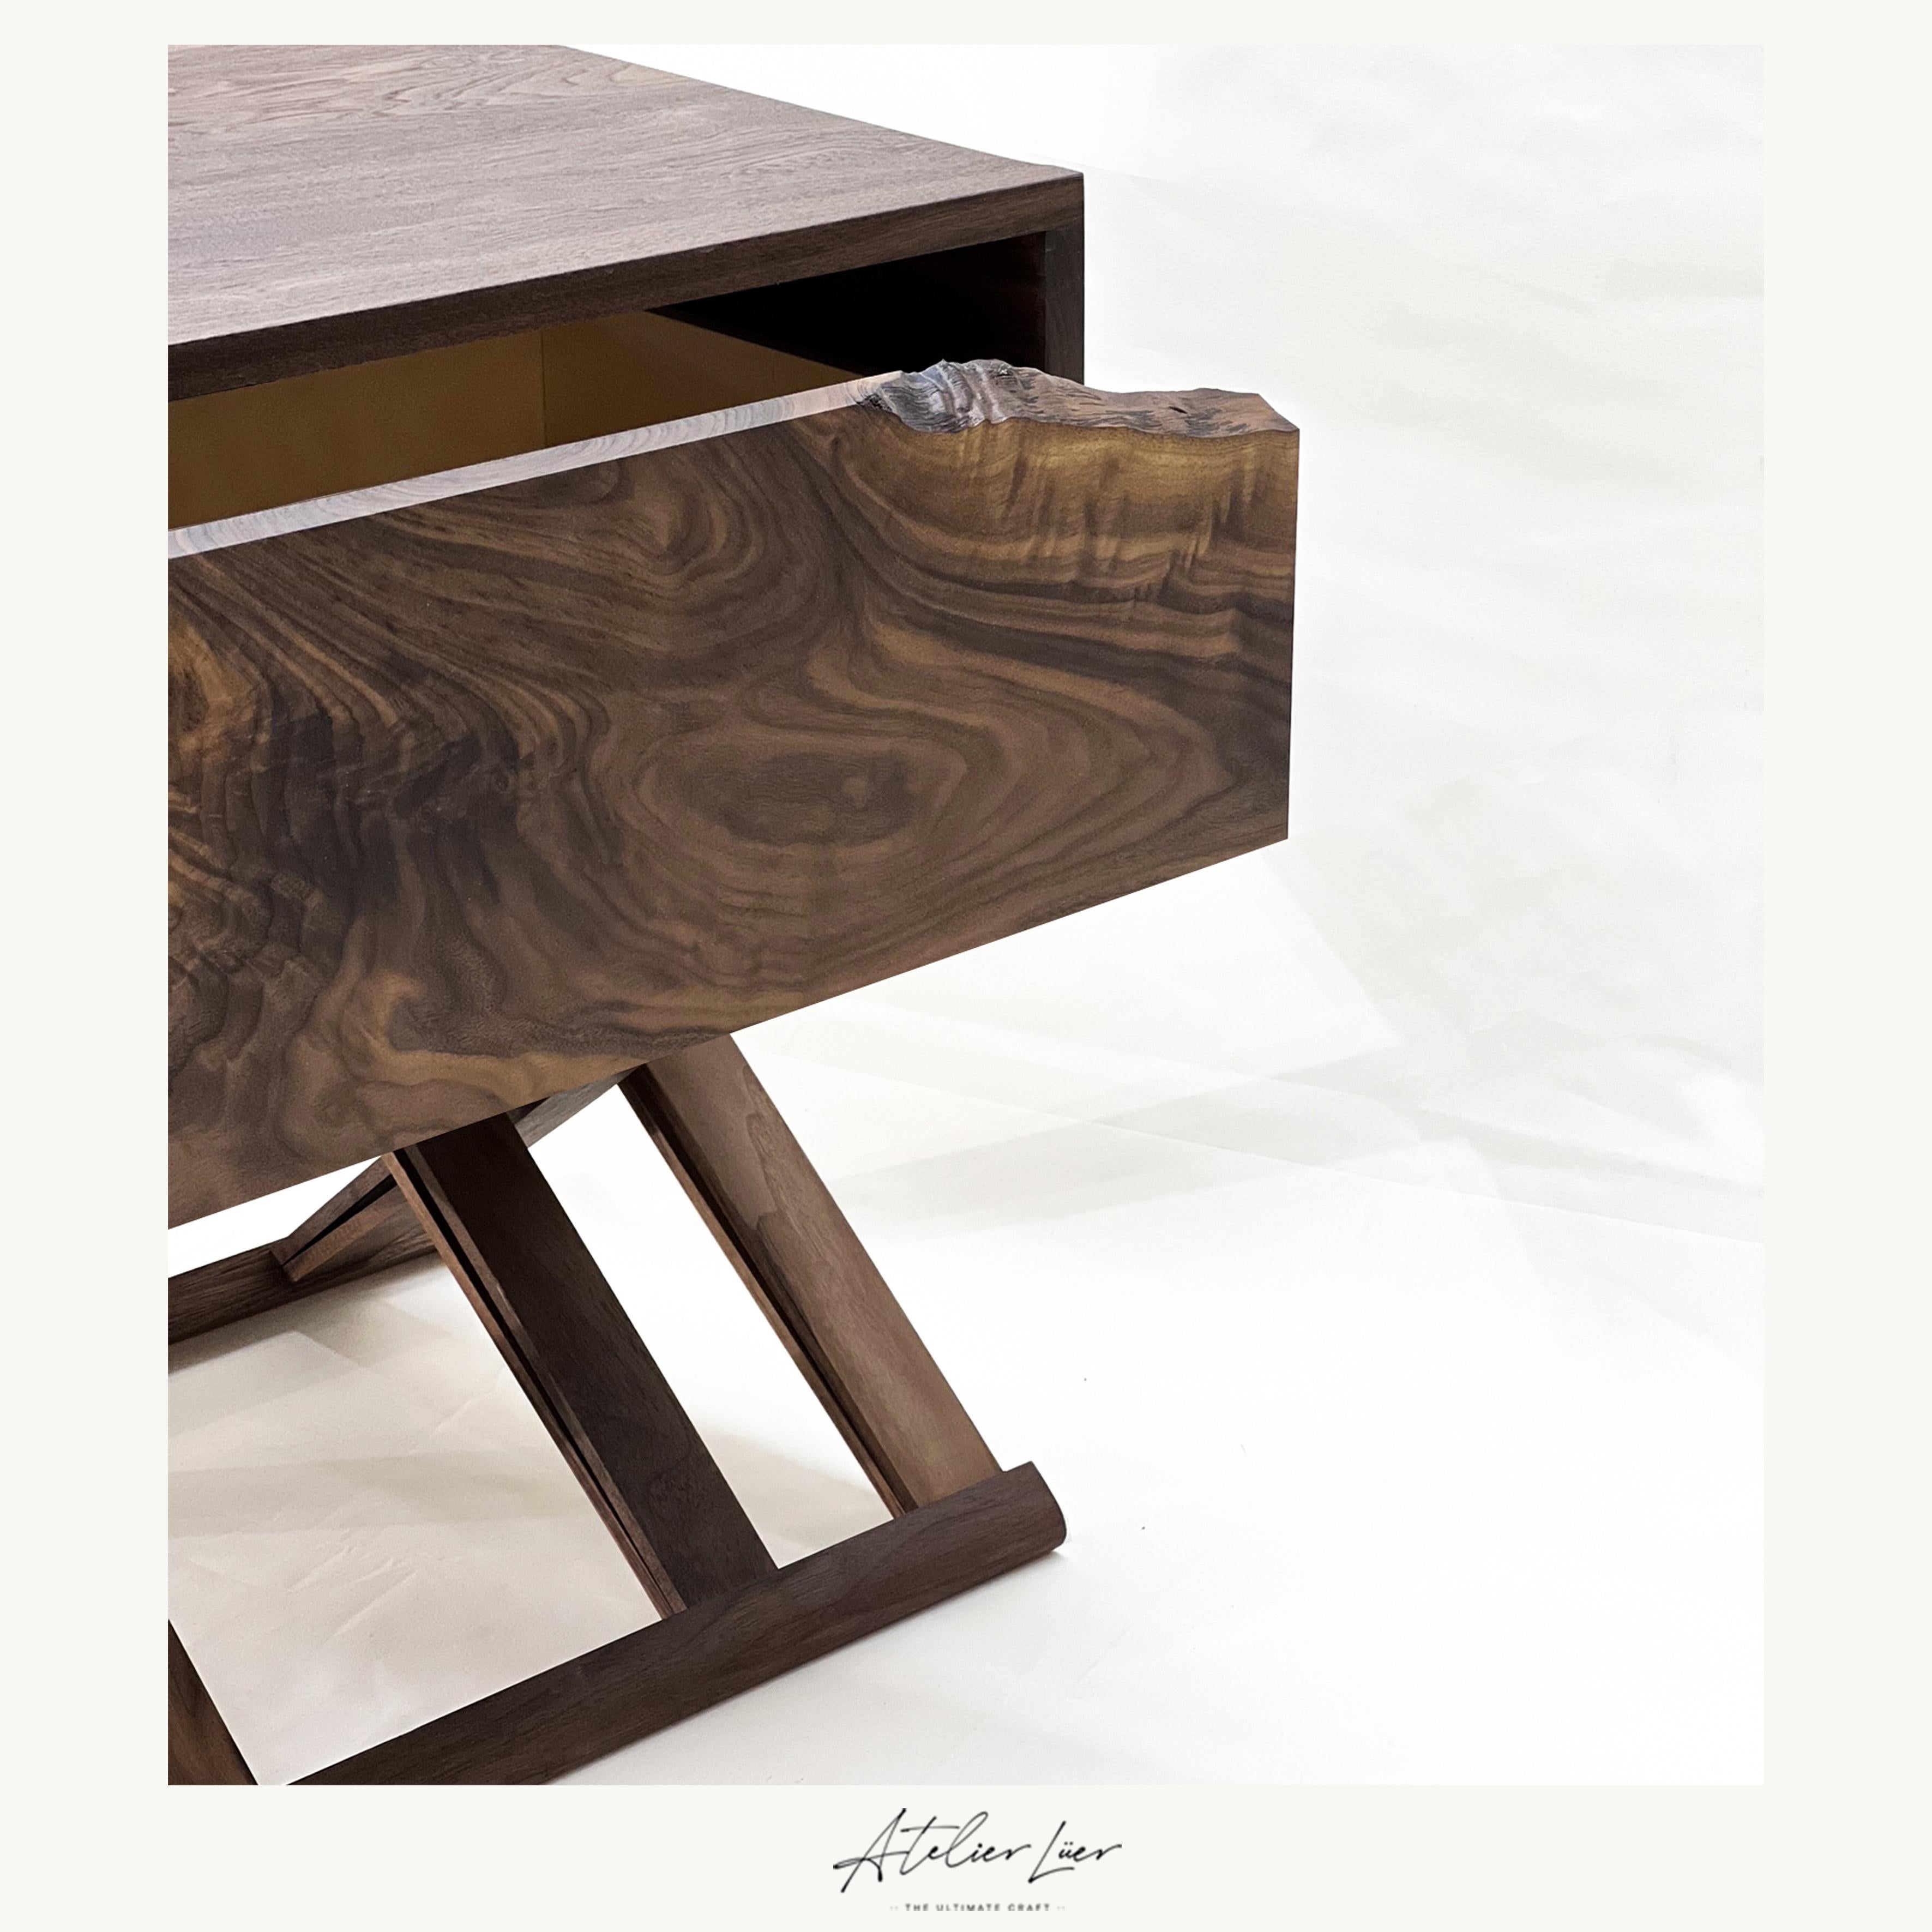 Atelier Luer walnut nightstand/end table with live edge drawer & x-frame base

Offered for sale is an Atelier Luer solid walnut nightstand/end/side table with a live edge drawer and an x-frame base with brass hardware and leather straps. This